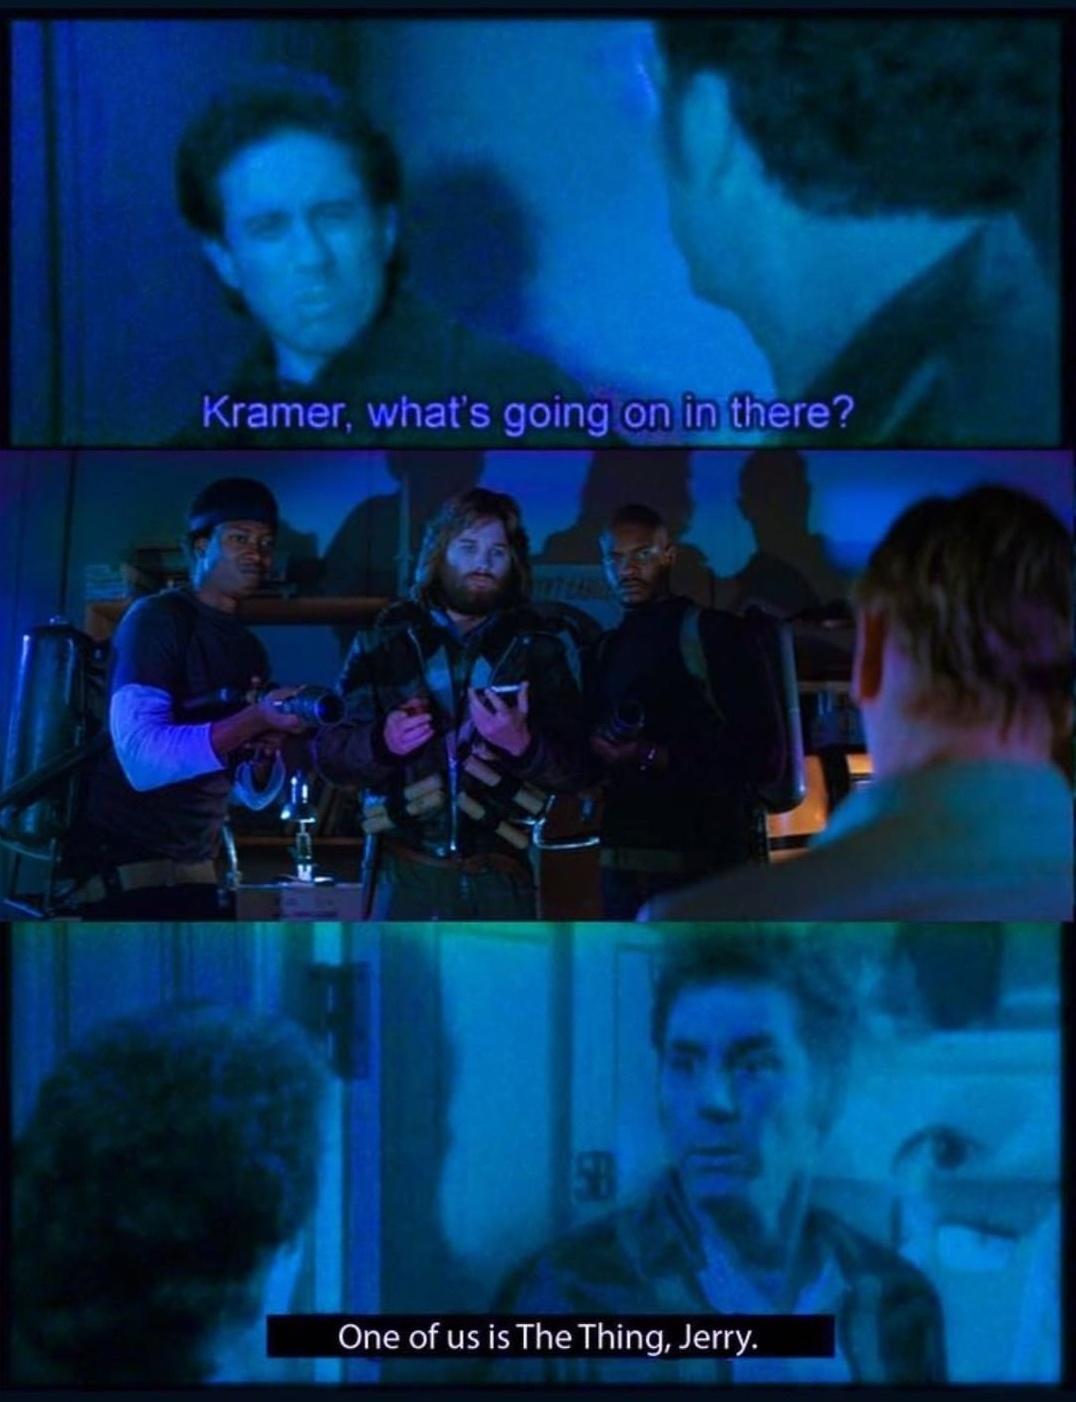 funny memes - dank memes - keith david the thing - Kramer, what's going on in there? One of us is The Thing, Jerry.